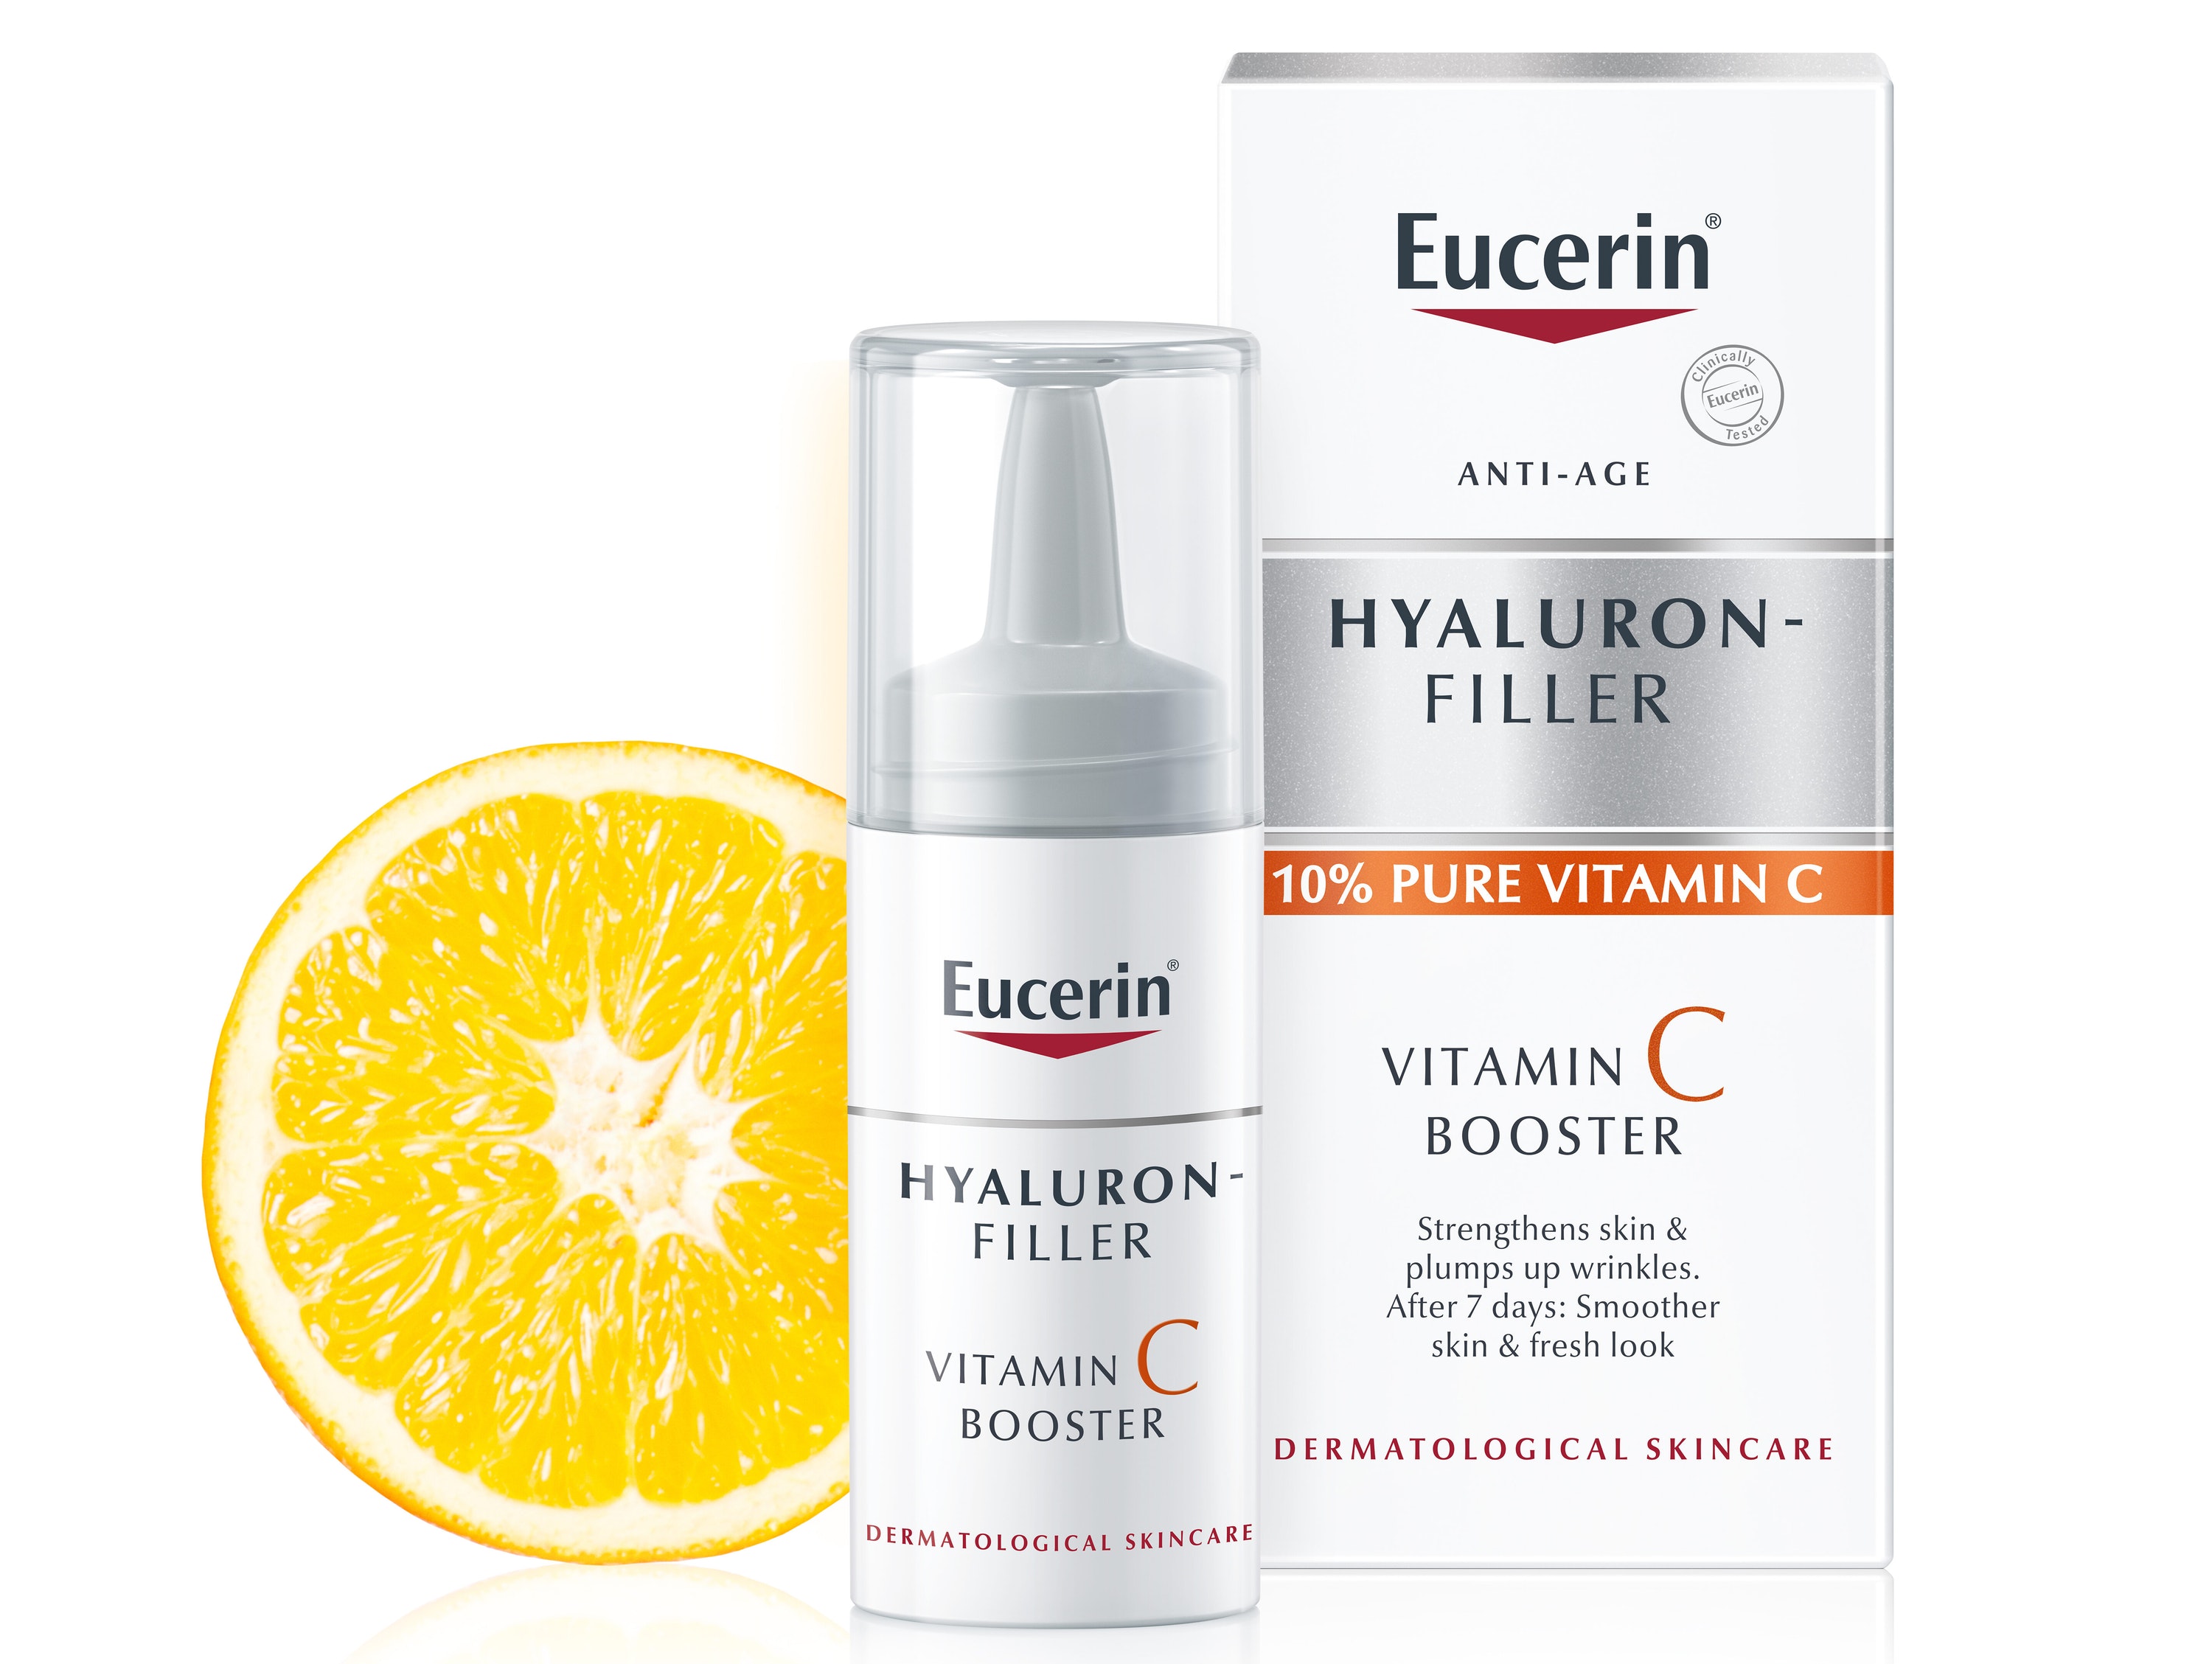 Eucerin Hyaluron- Filler Vitamin C Booster 3x8ml, AED102.09